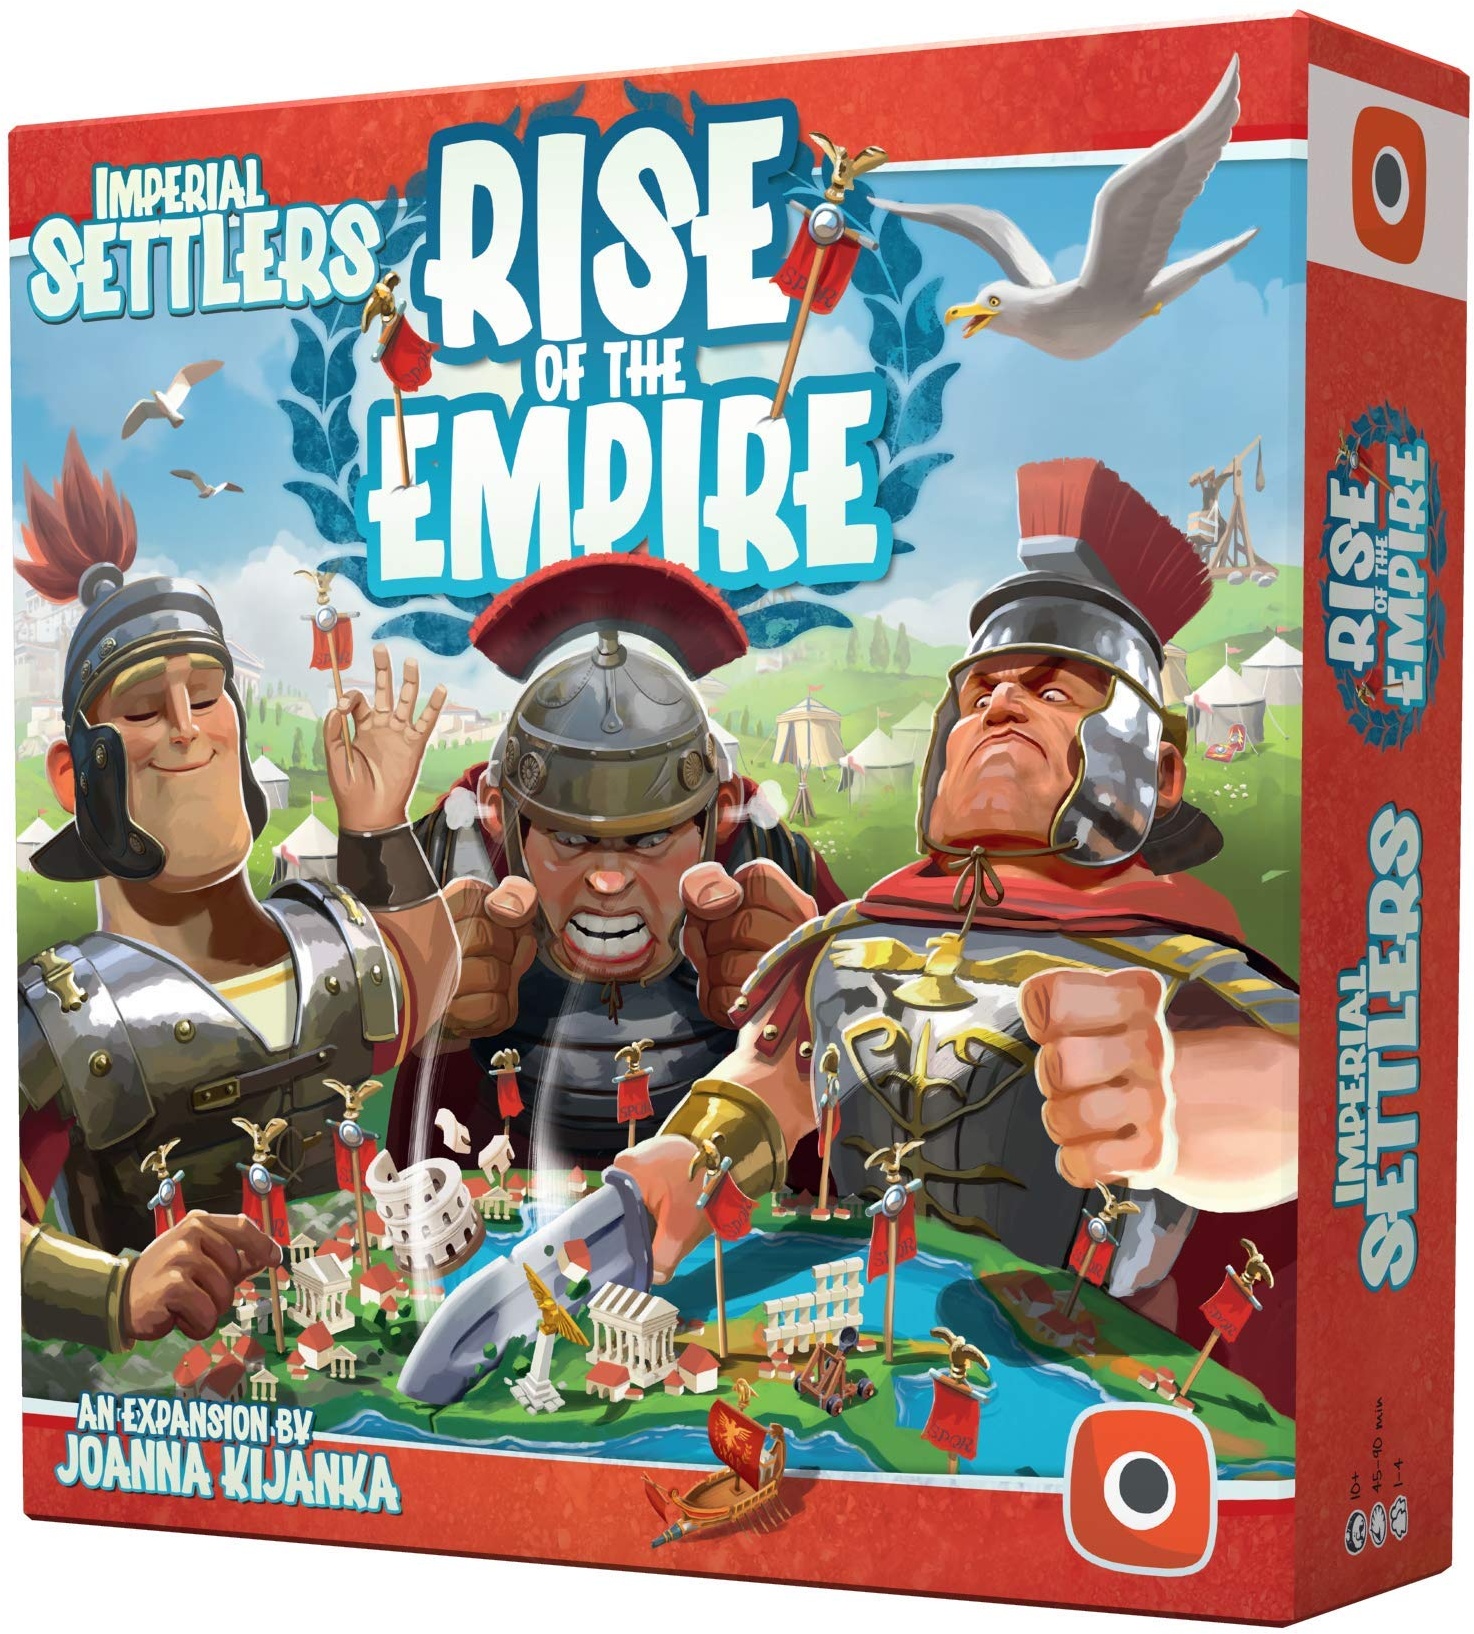 Portal Publishing 392 - Imperial Settlers: Rise of the Empires Expansion